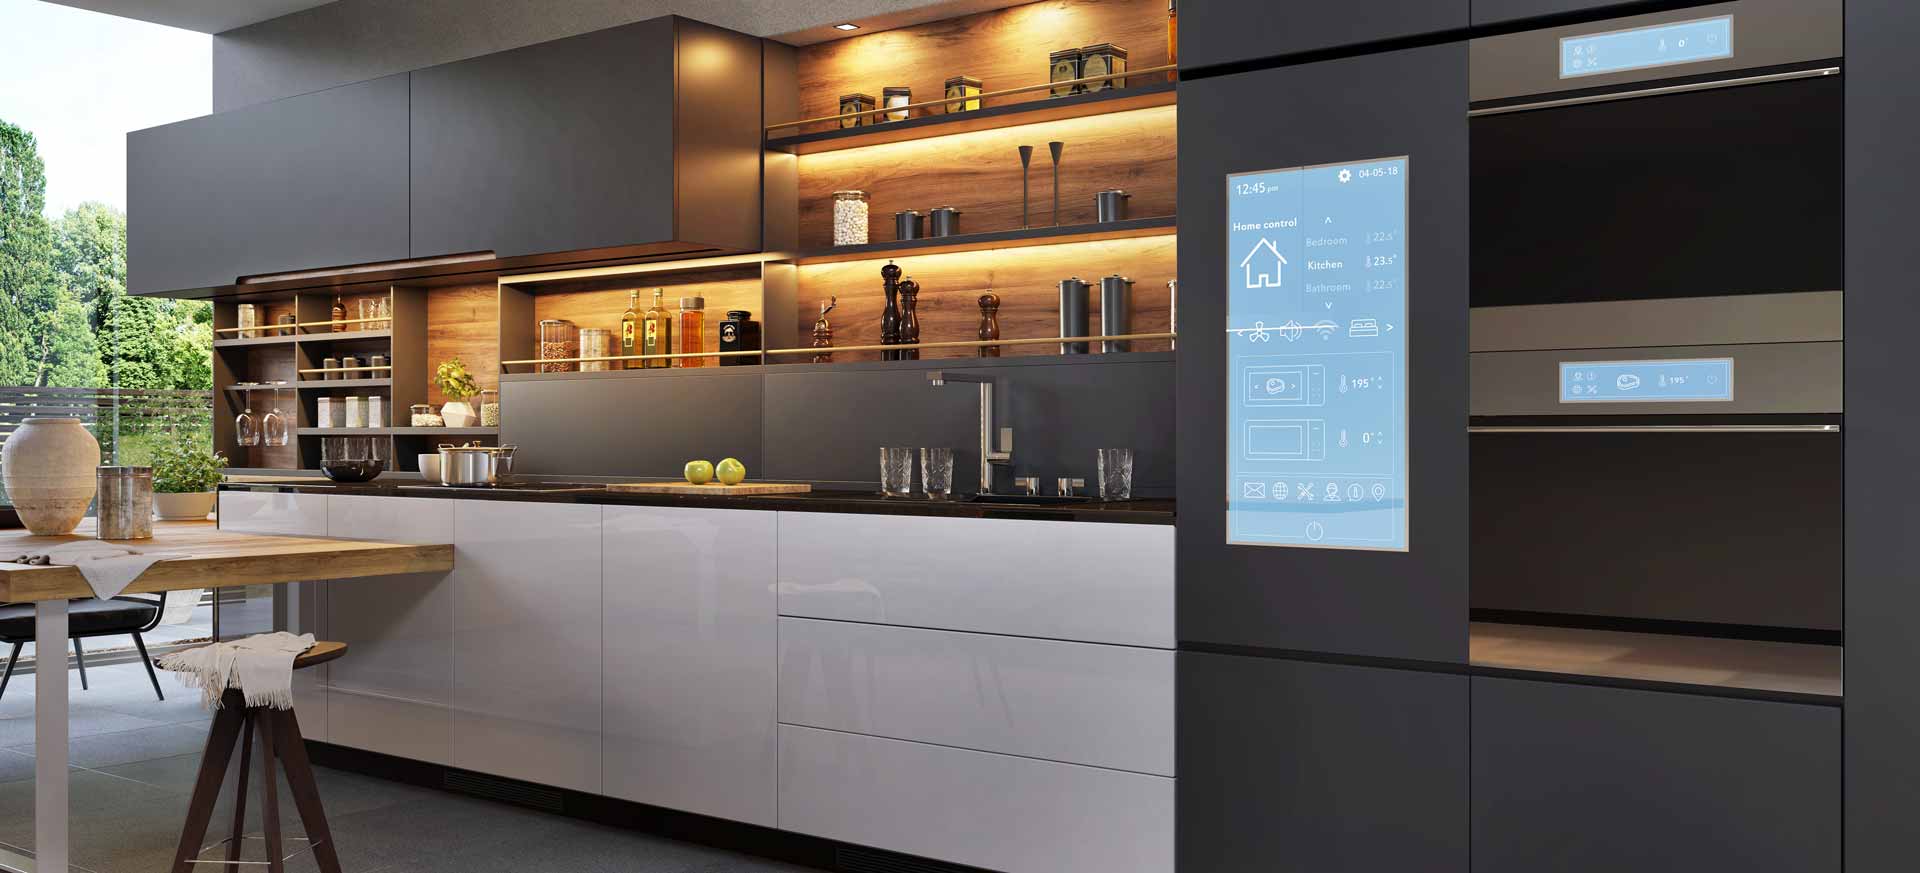 Futuristic kitchen equipped with smart appliances